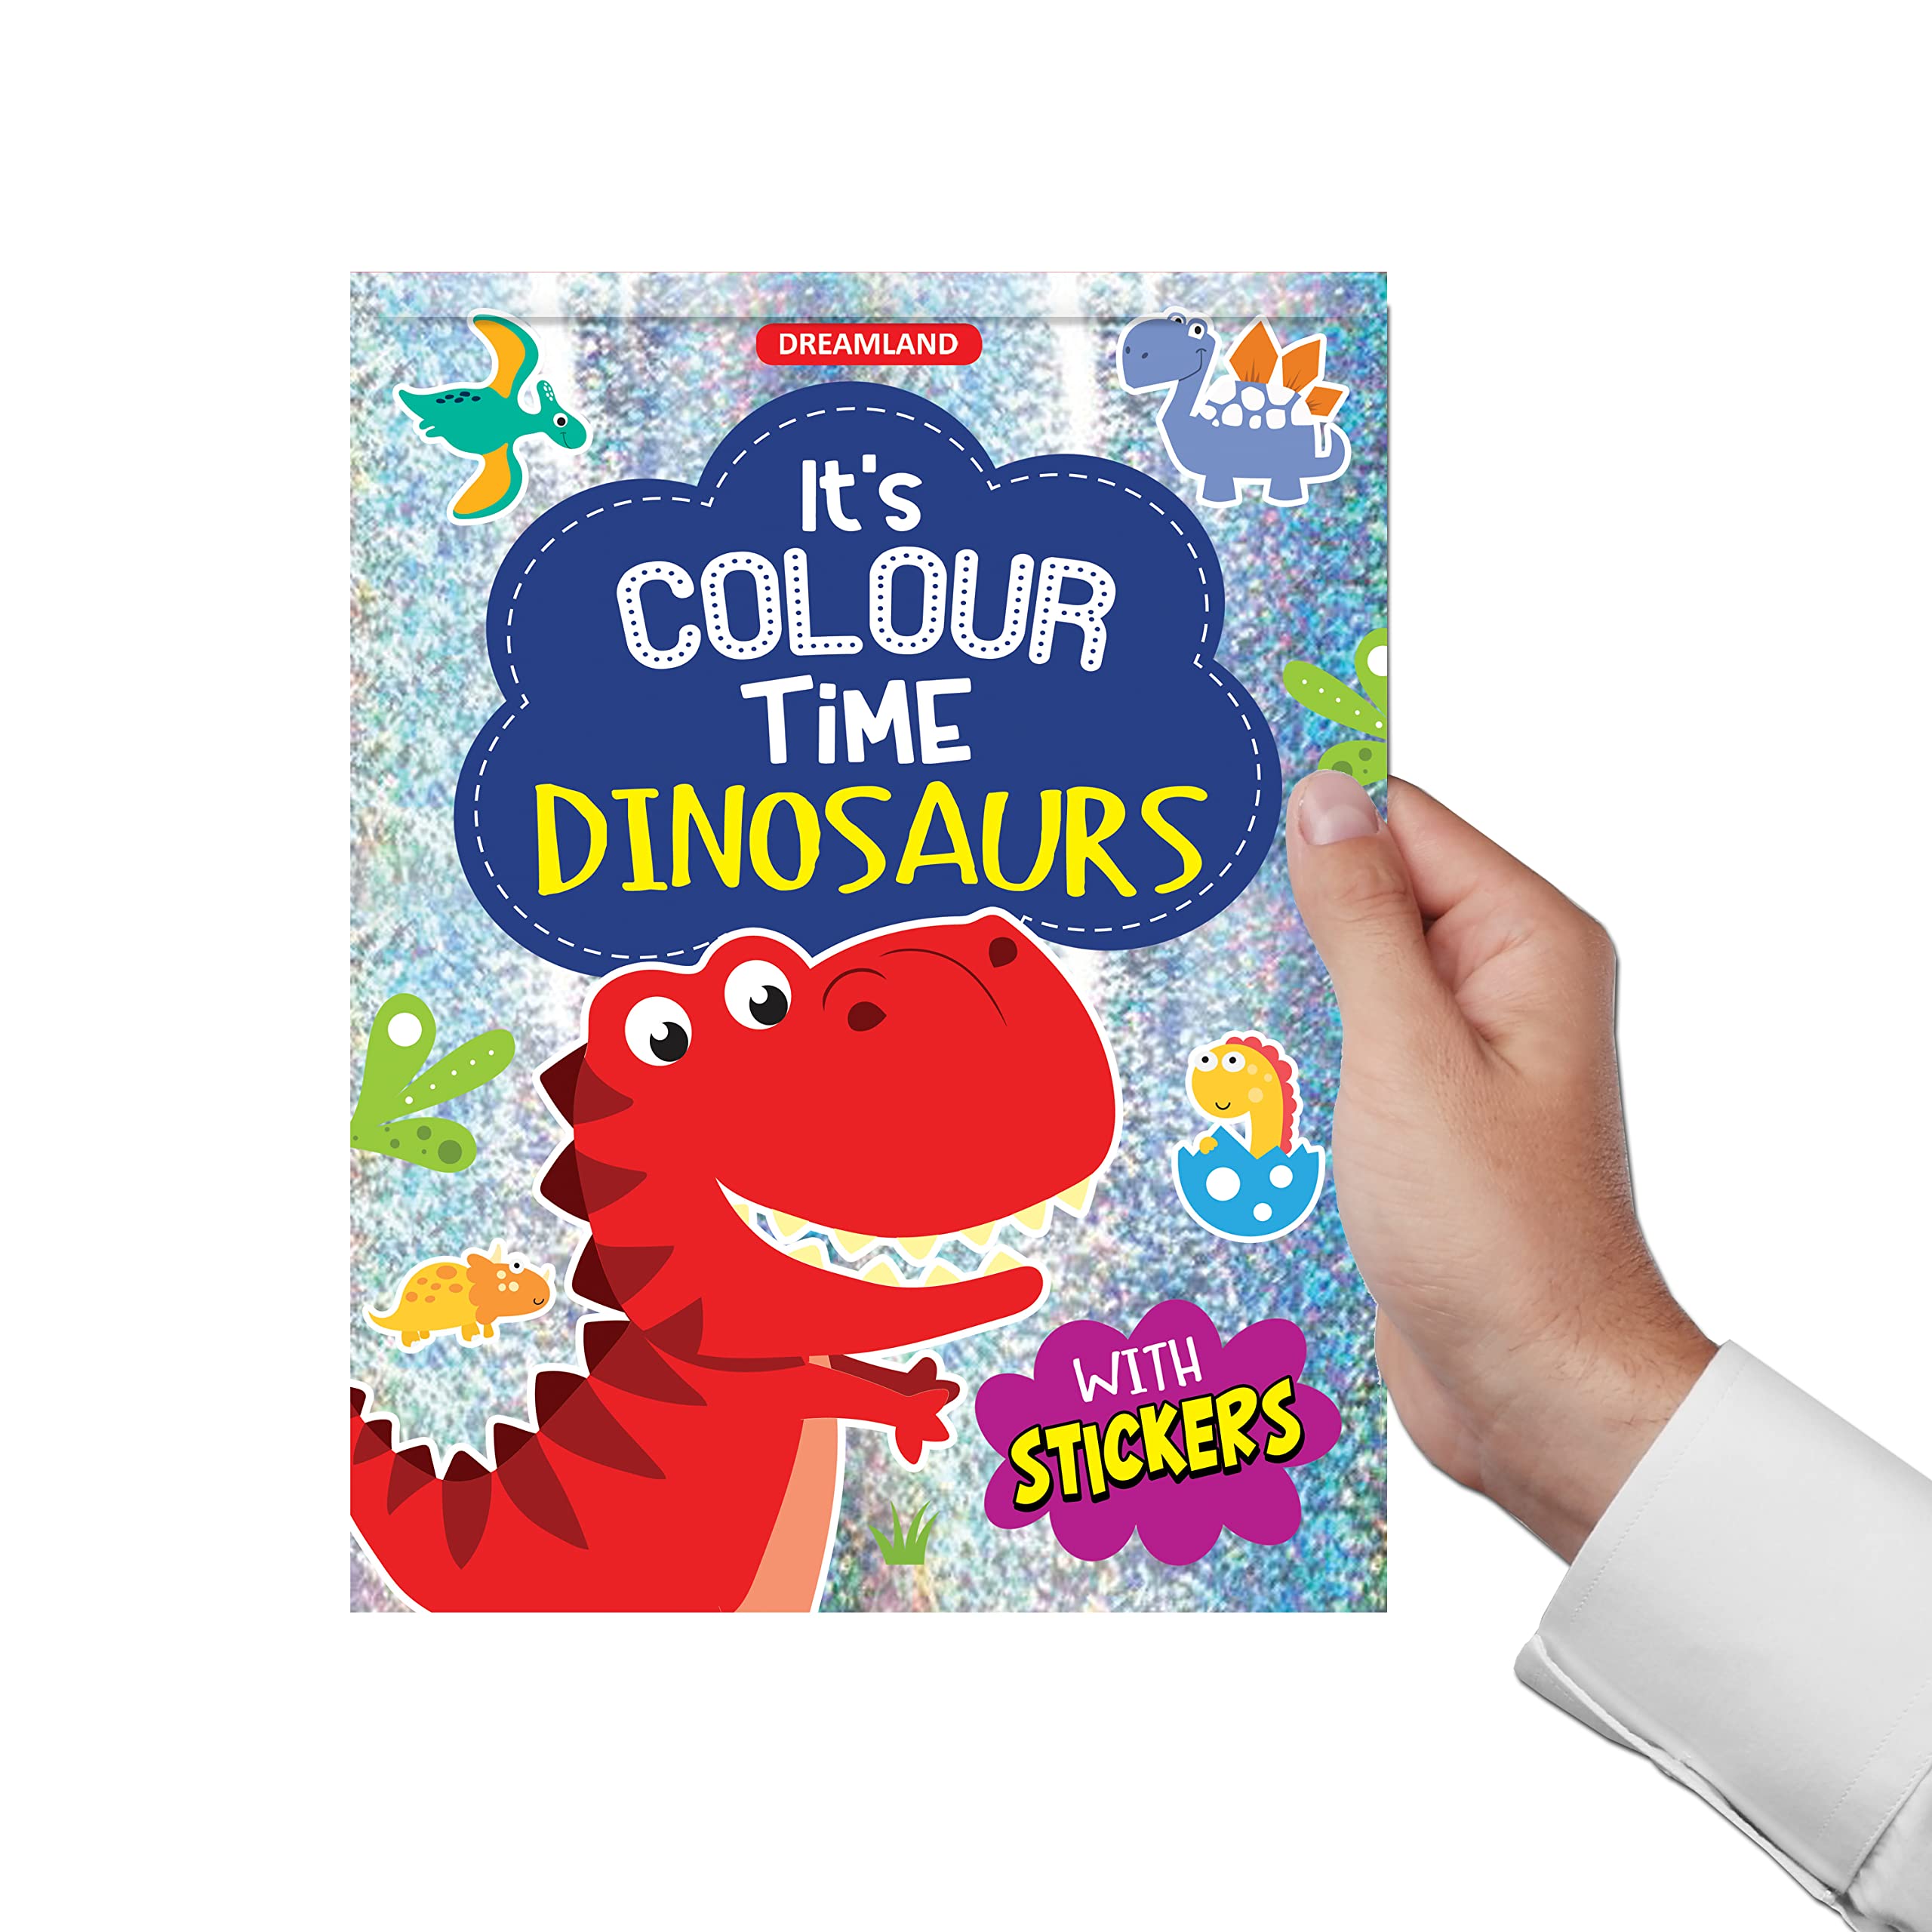 Dreamland Dinosaurs - It's Colour time with Stickers - An Activity Book For Kids Ages 3+